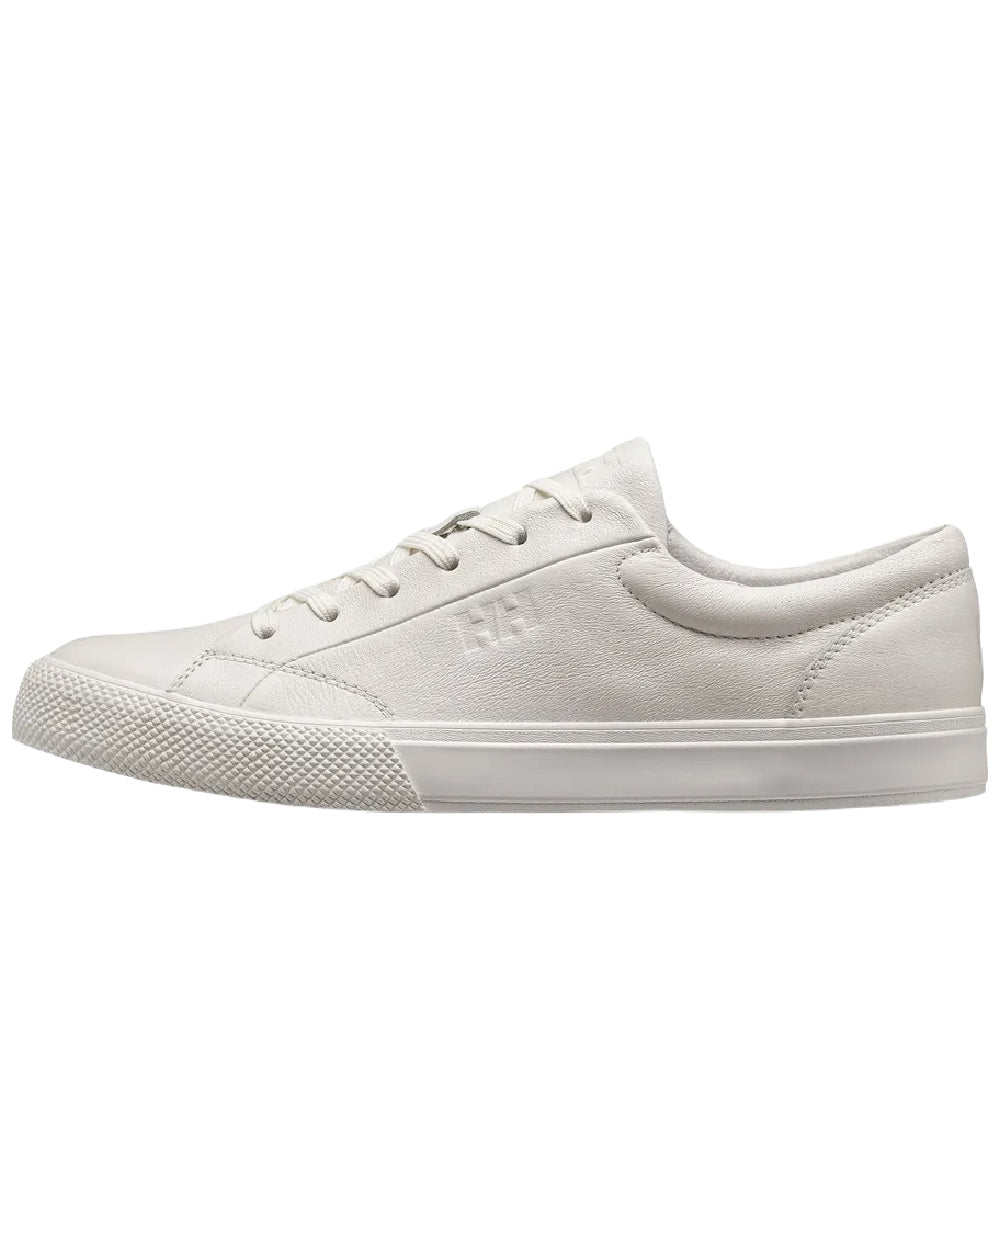 Helly Hansen Womens Fjord Shoes in White 